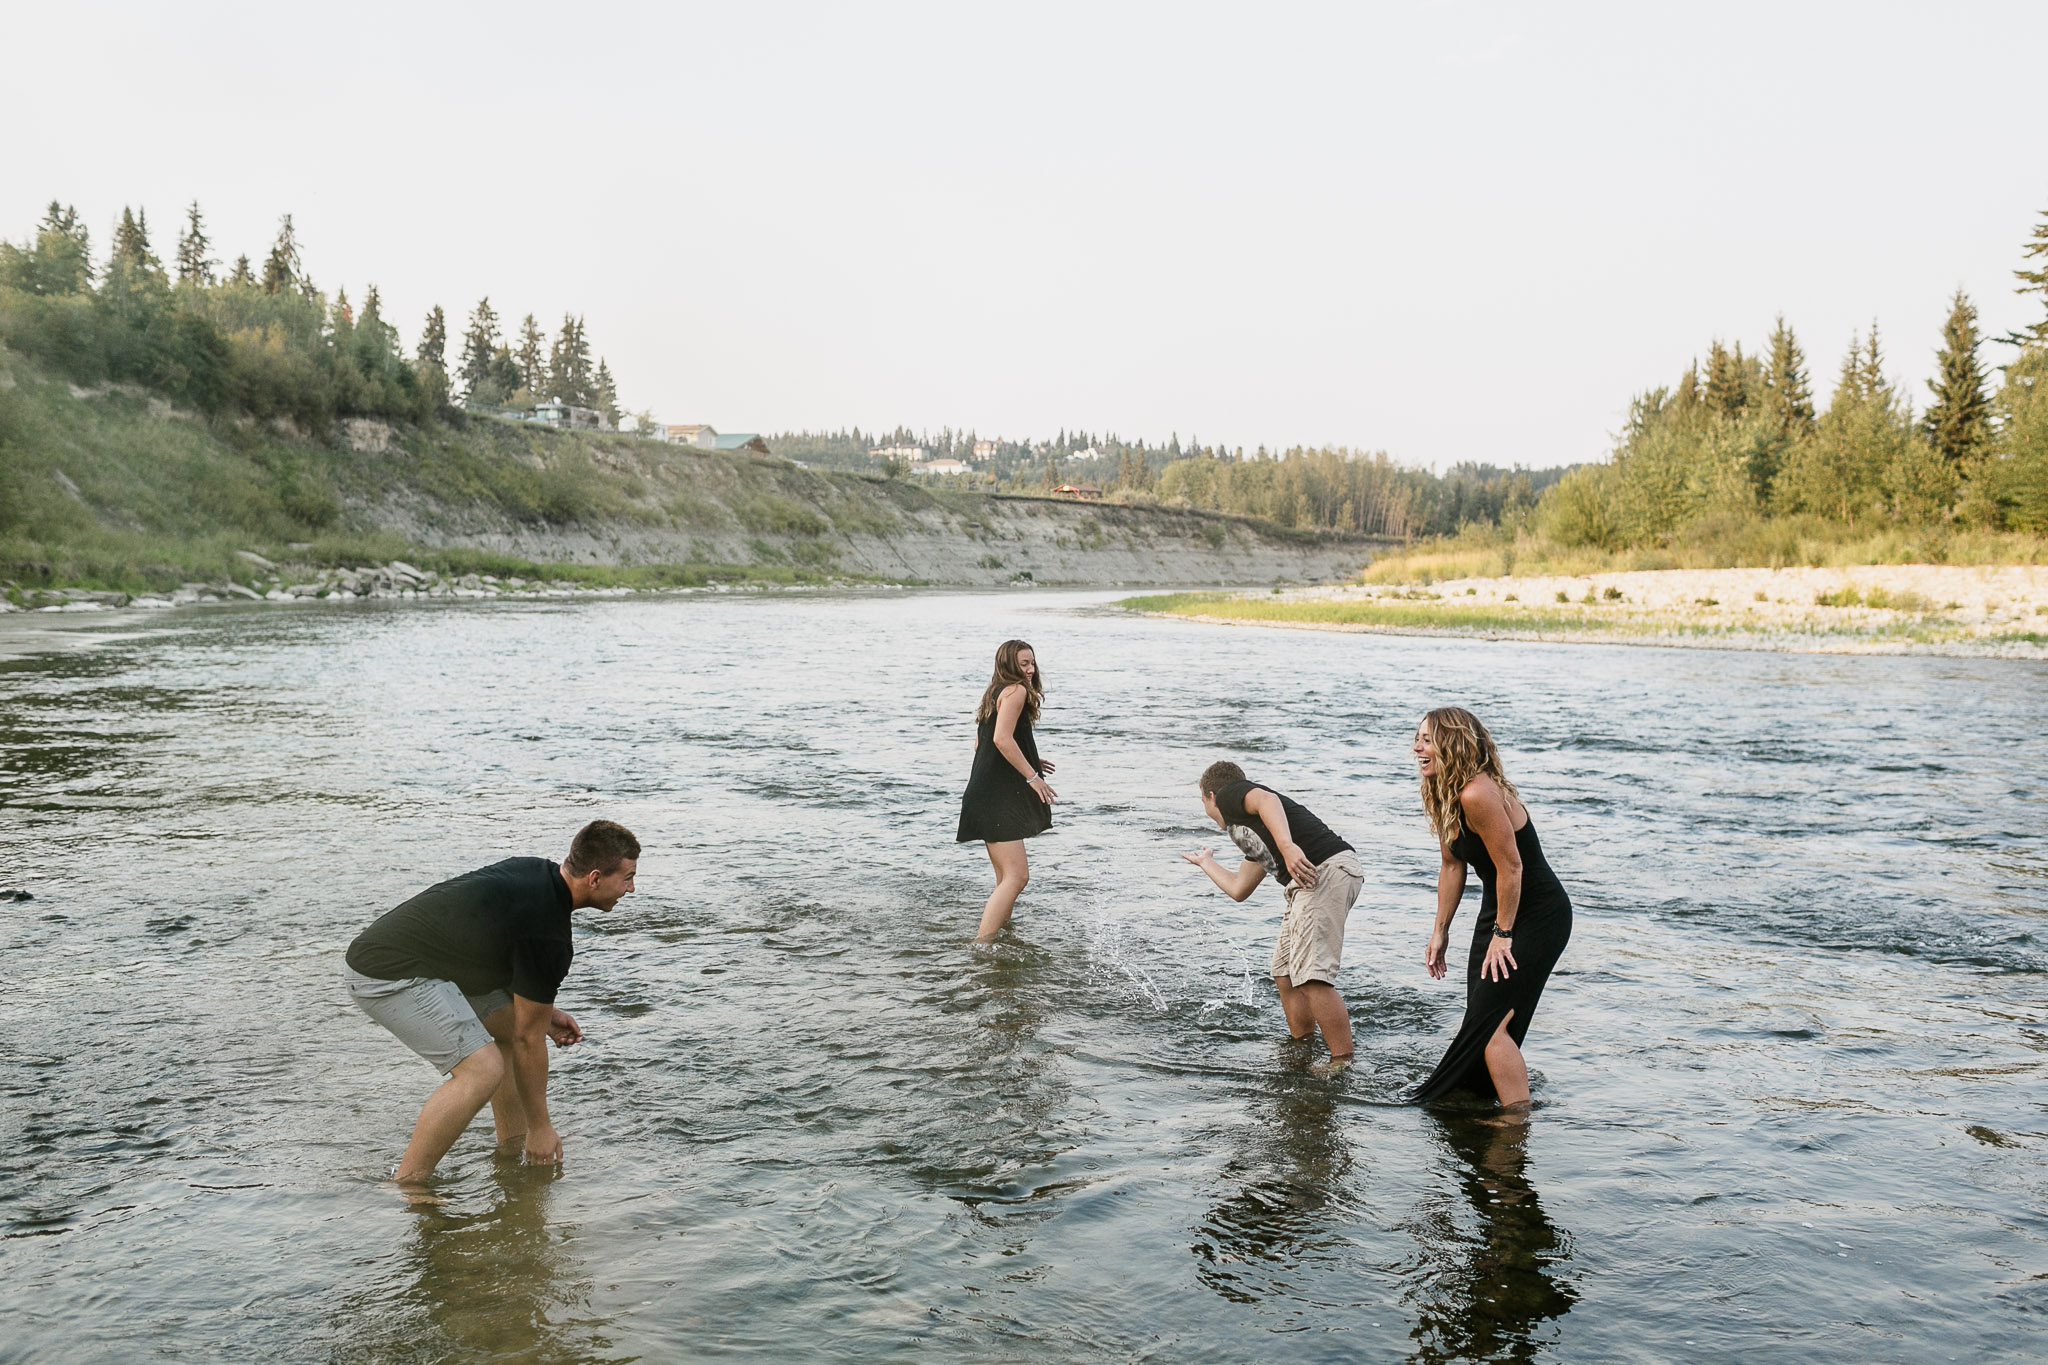 two men and 2 women splashing in the river